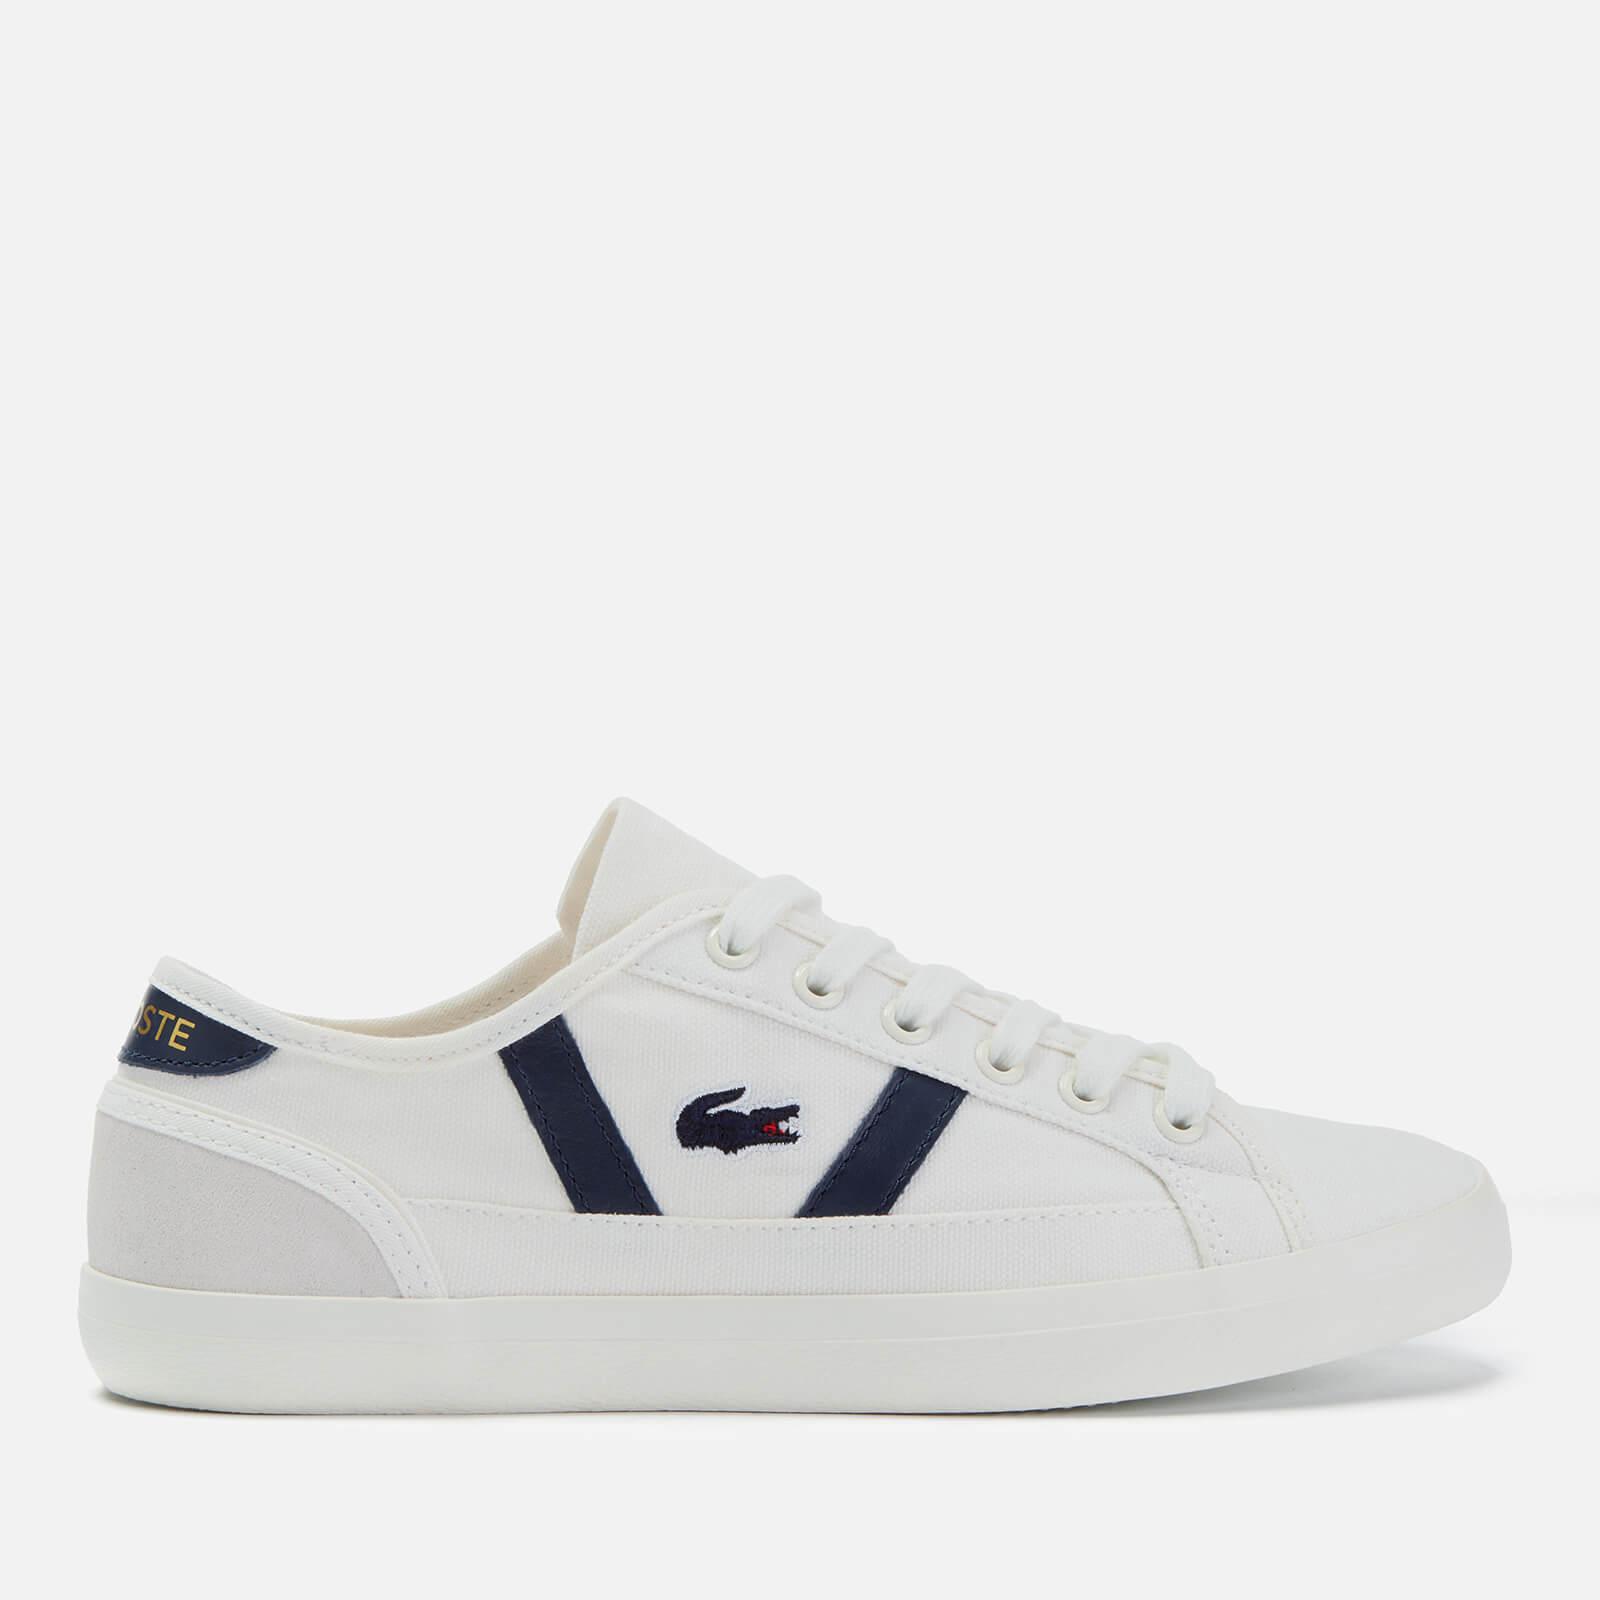 Lacoste Canvas Sideline 119 1 Women's Shoes (trainers) In White - Lyst